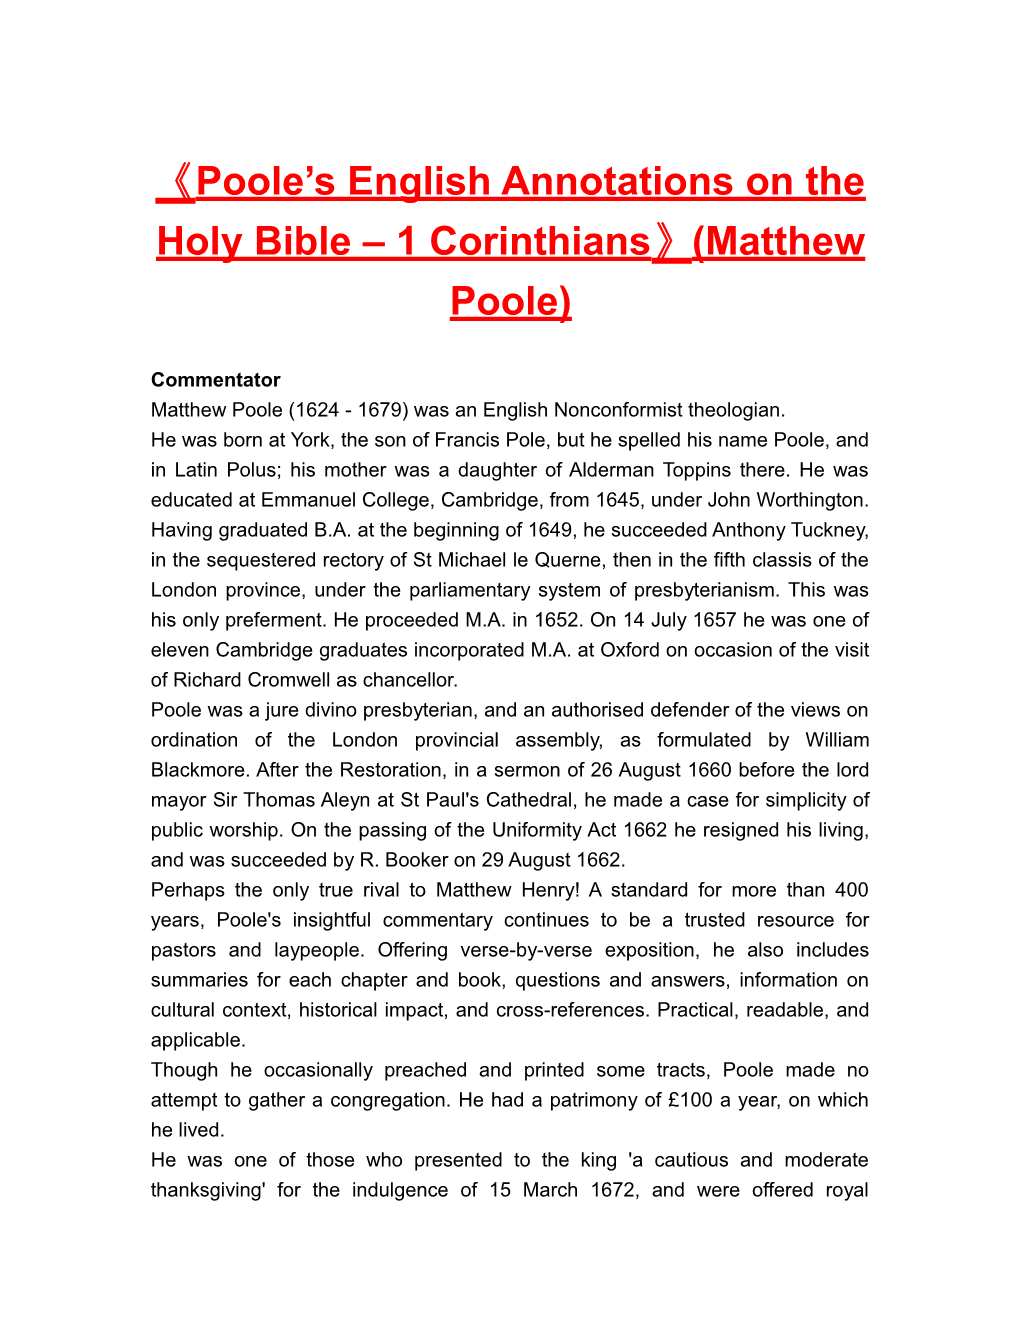 Poole S English Annotations on the Holy Bible 1 Corinthians (Matthew Poole)